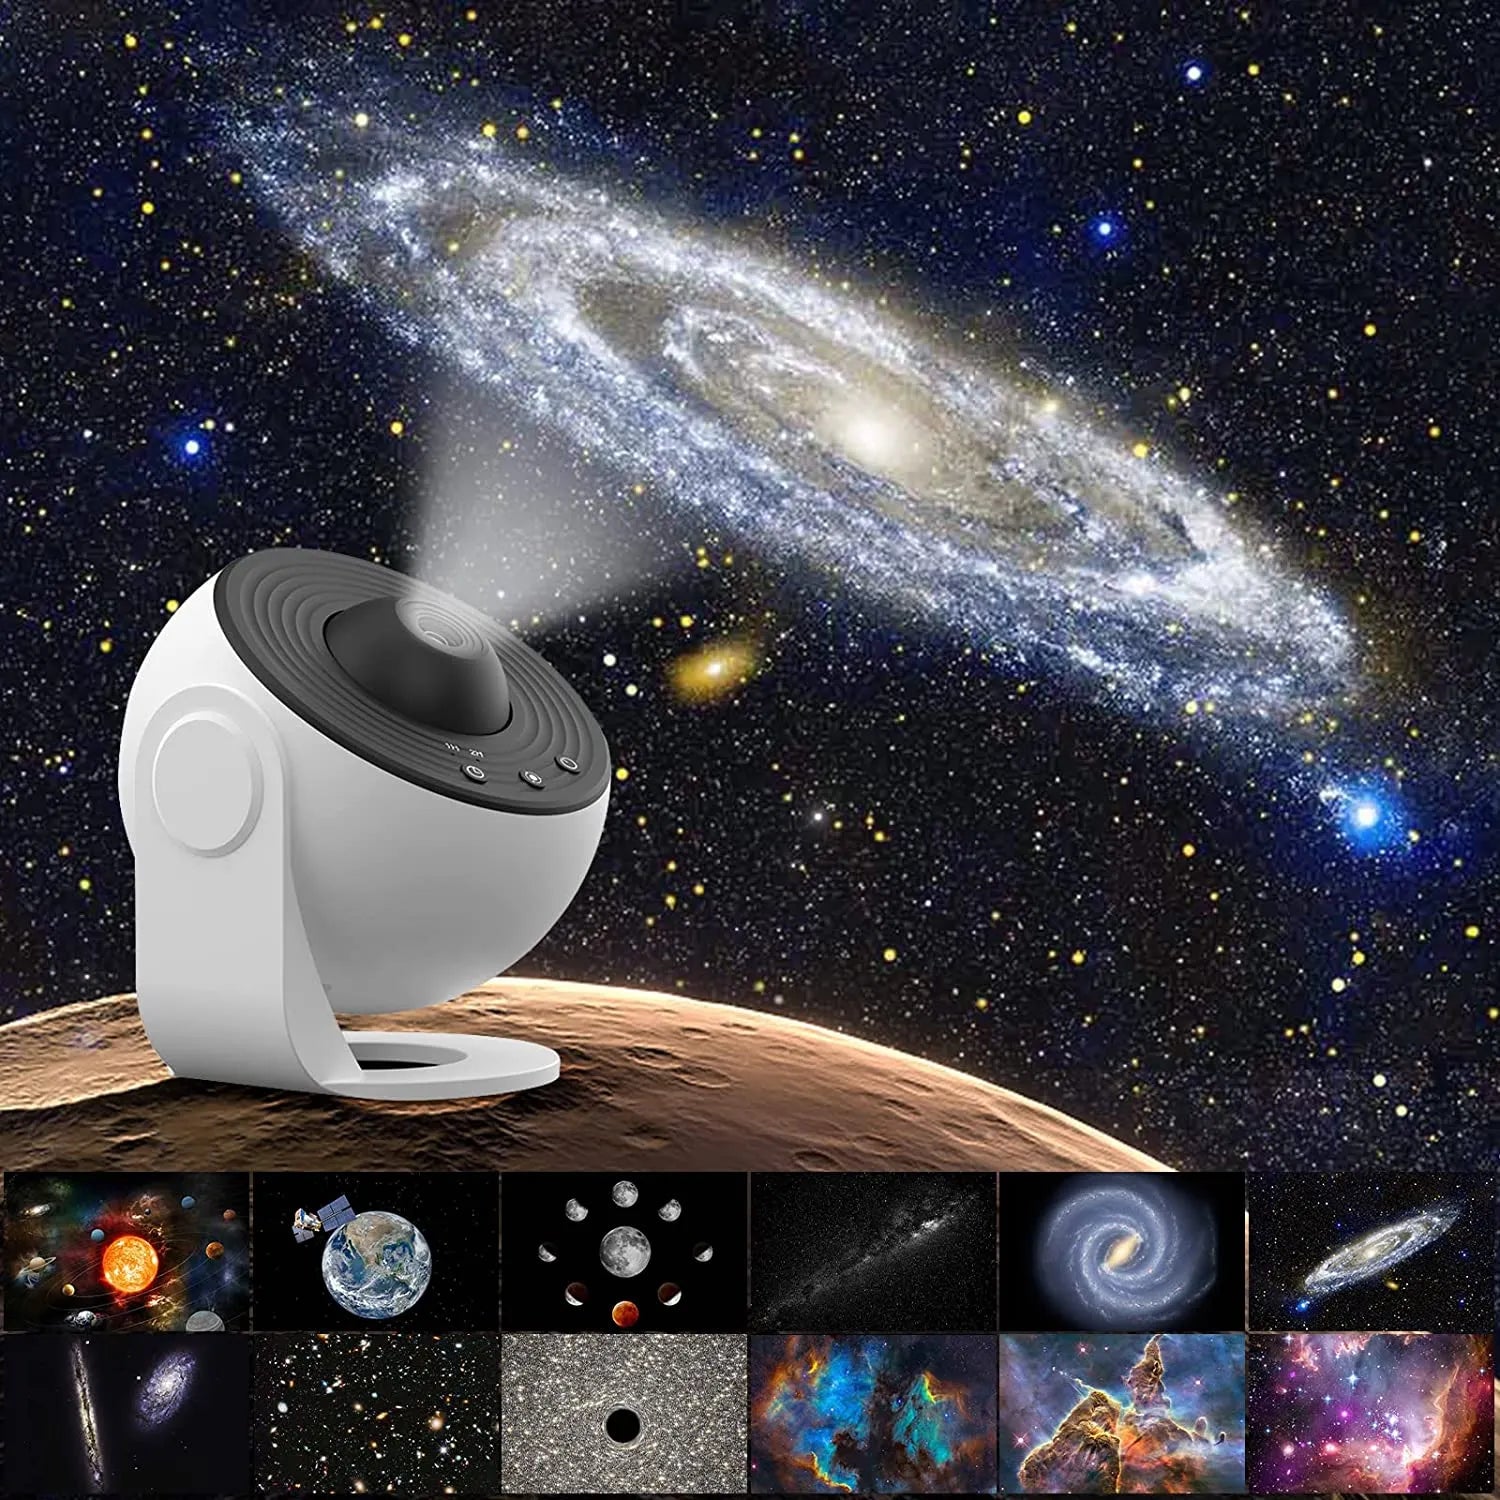 13  in 1 Star Projector, Planetarium Galaxy Projector for Bedroom, Aurora Projector, Night Light Projector for Kids Adults